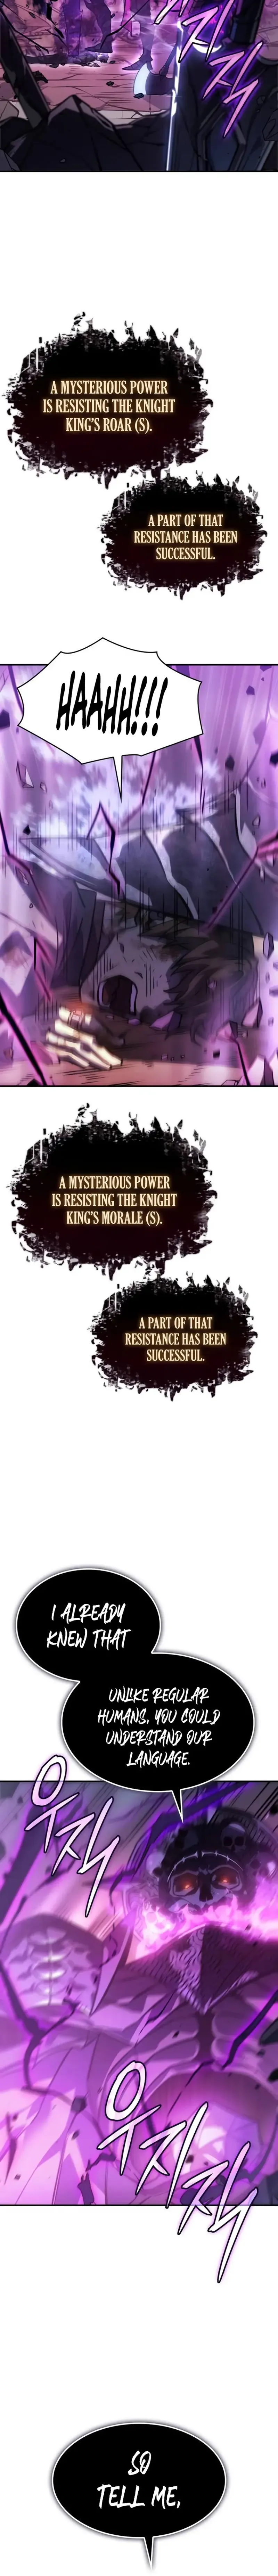 Regressing with the King’s Power chapter 22